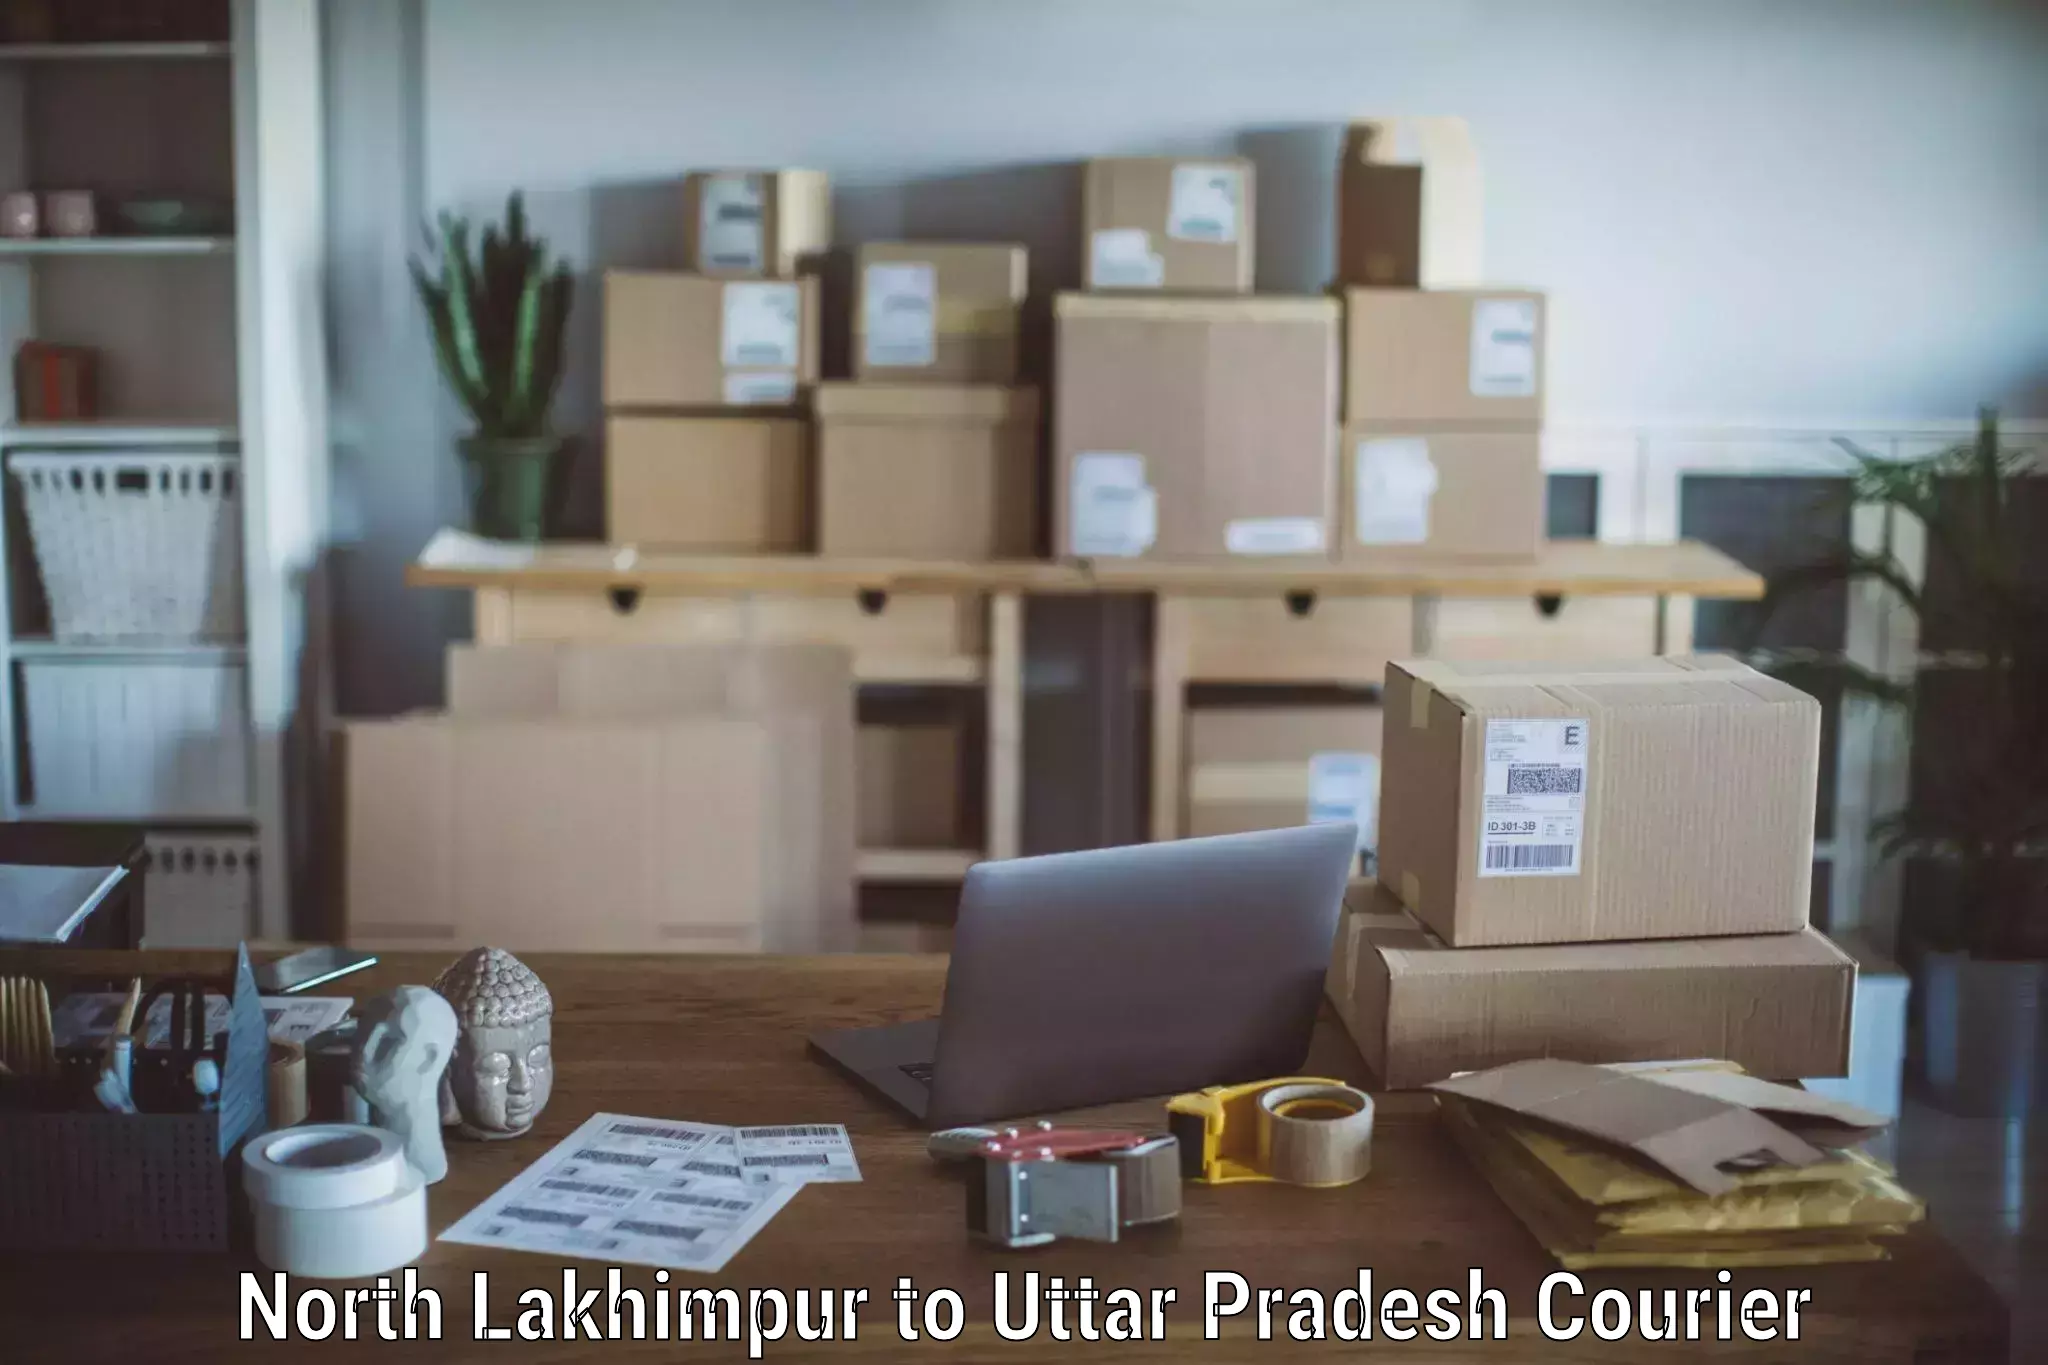 Expert moving and storage North Lakhimpur to Lalitpur